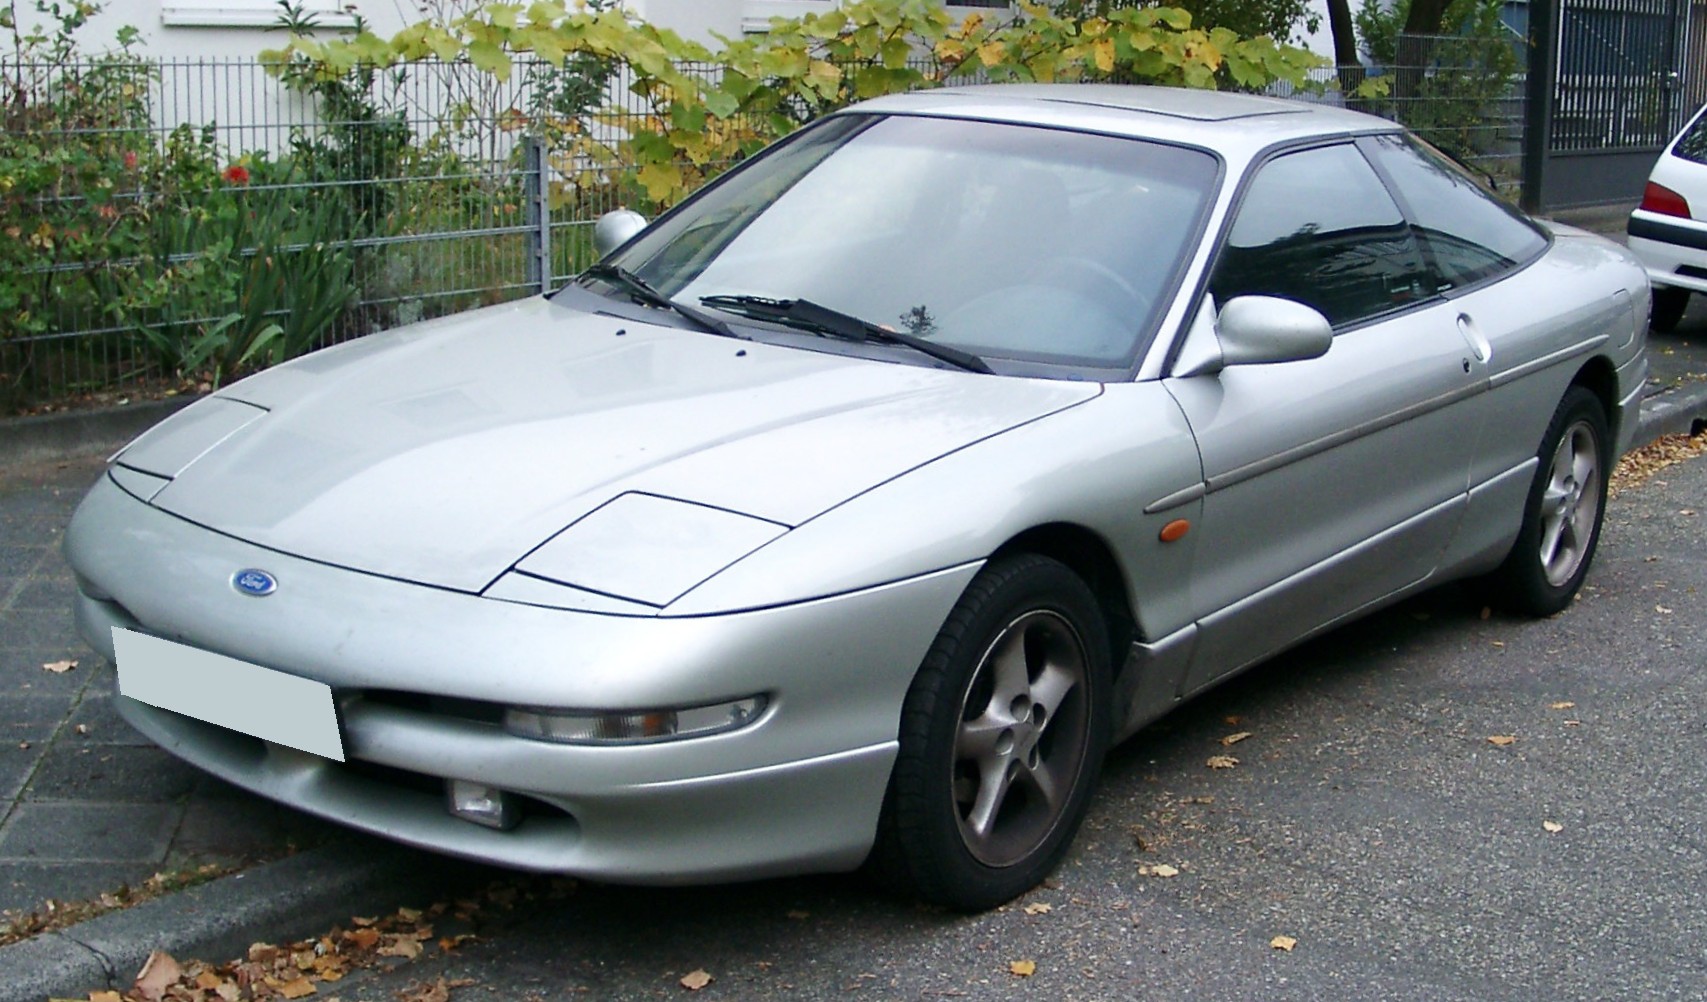 File:Ford Probe front 20071025.jpg